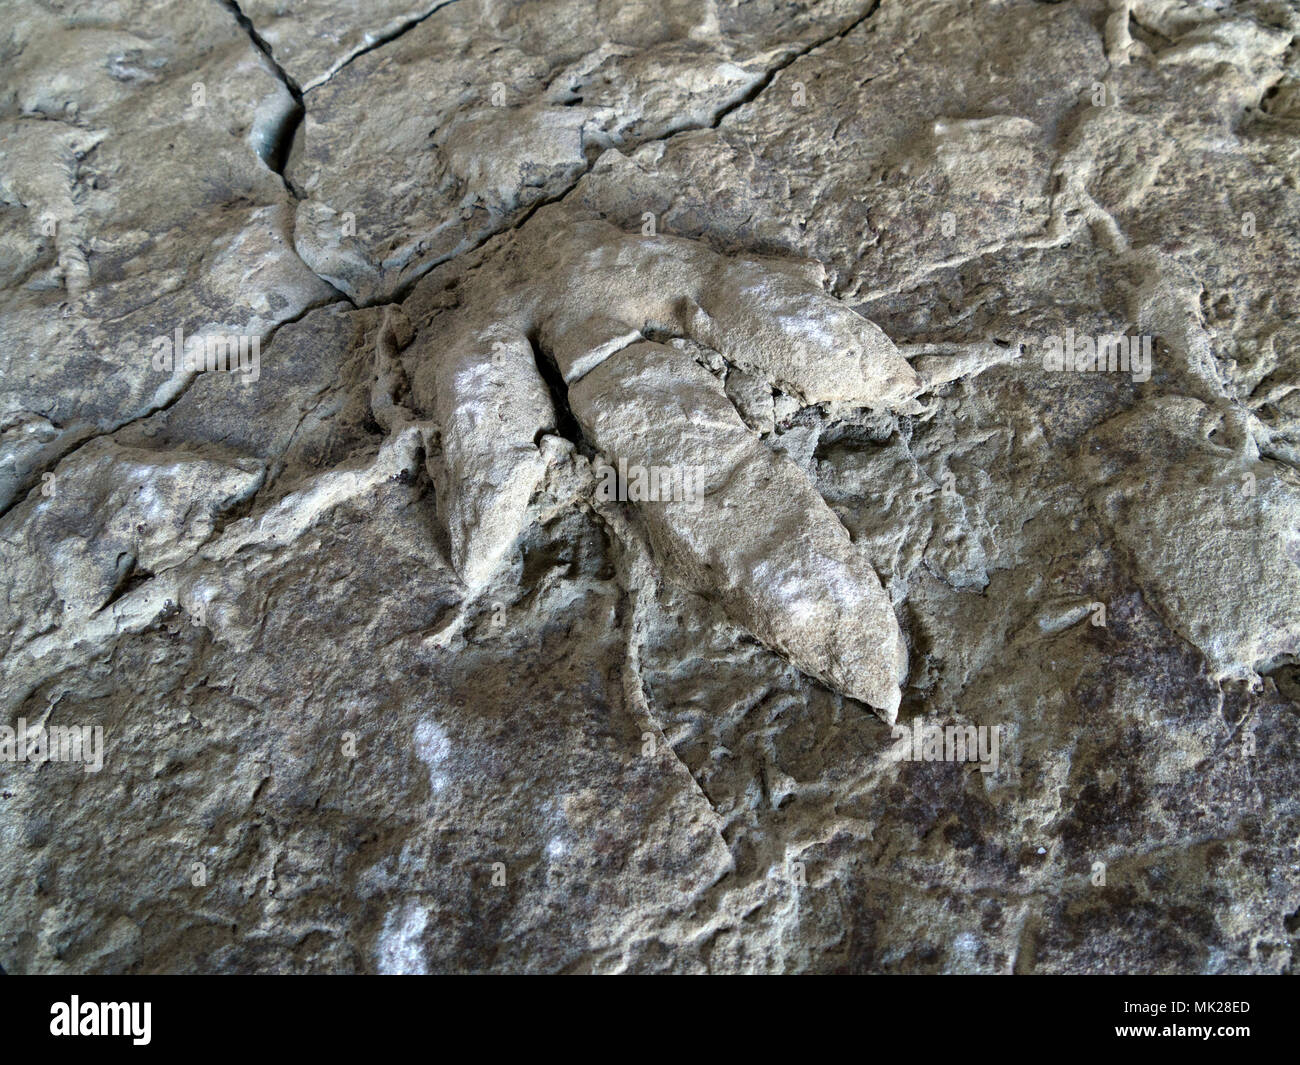 Fossilised adult & young ornithopod dinosaur footprints found in rock slab on Skye and now in Staffin Dinosaur museum, Isle of Skye, Scotland, UK Stock Photo